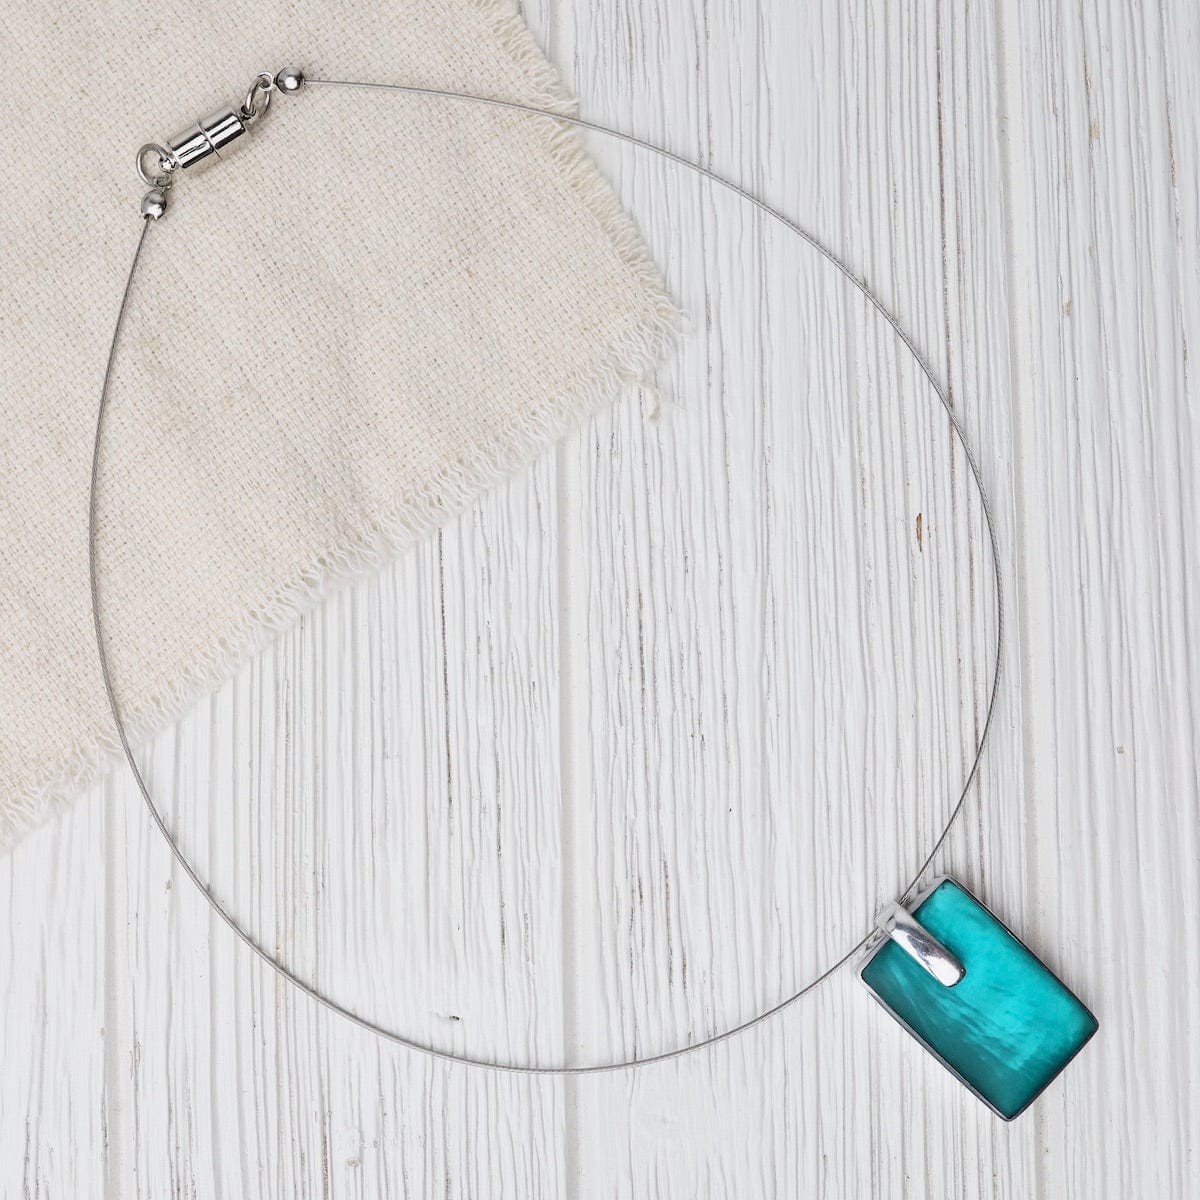 NKL Turquoise Rectangle Pendant Necklace